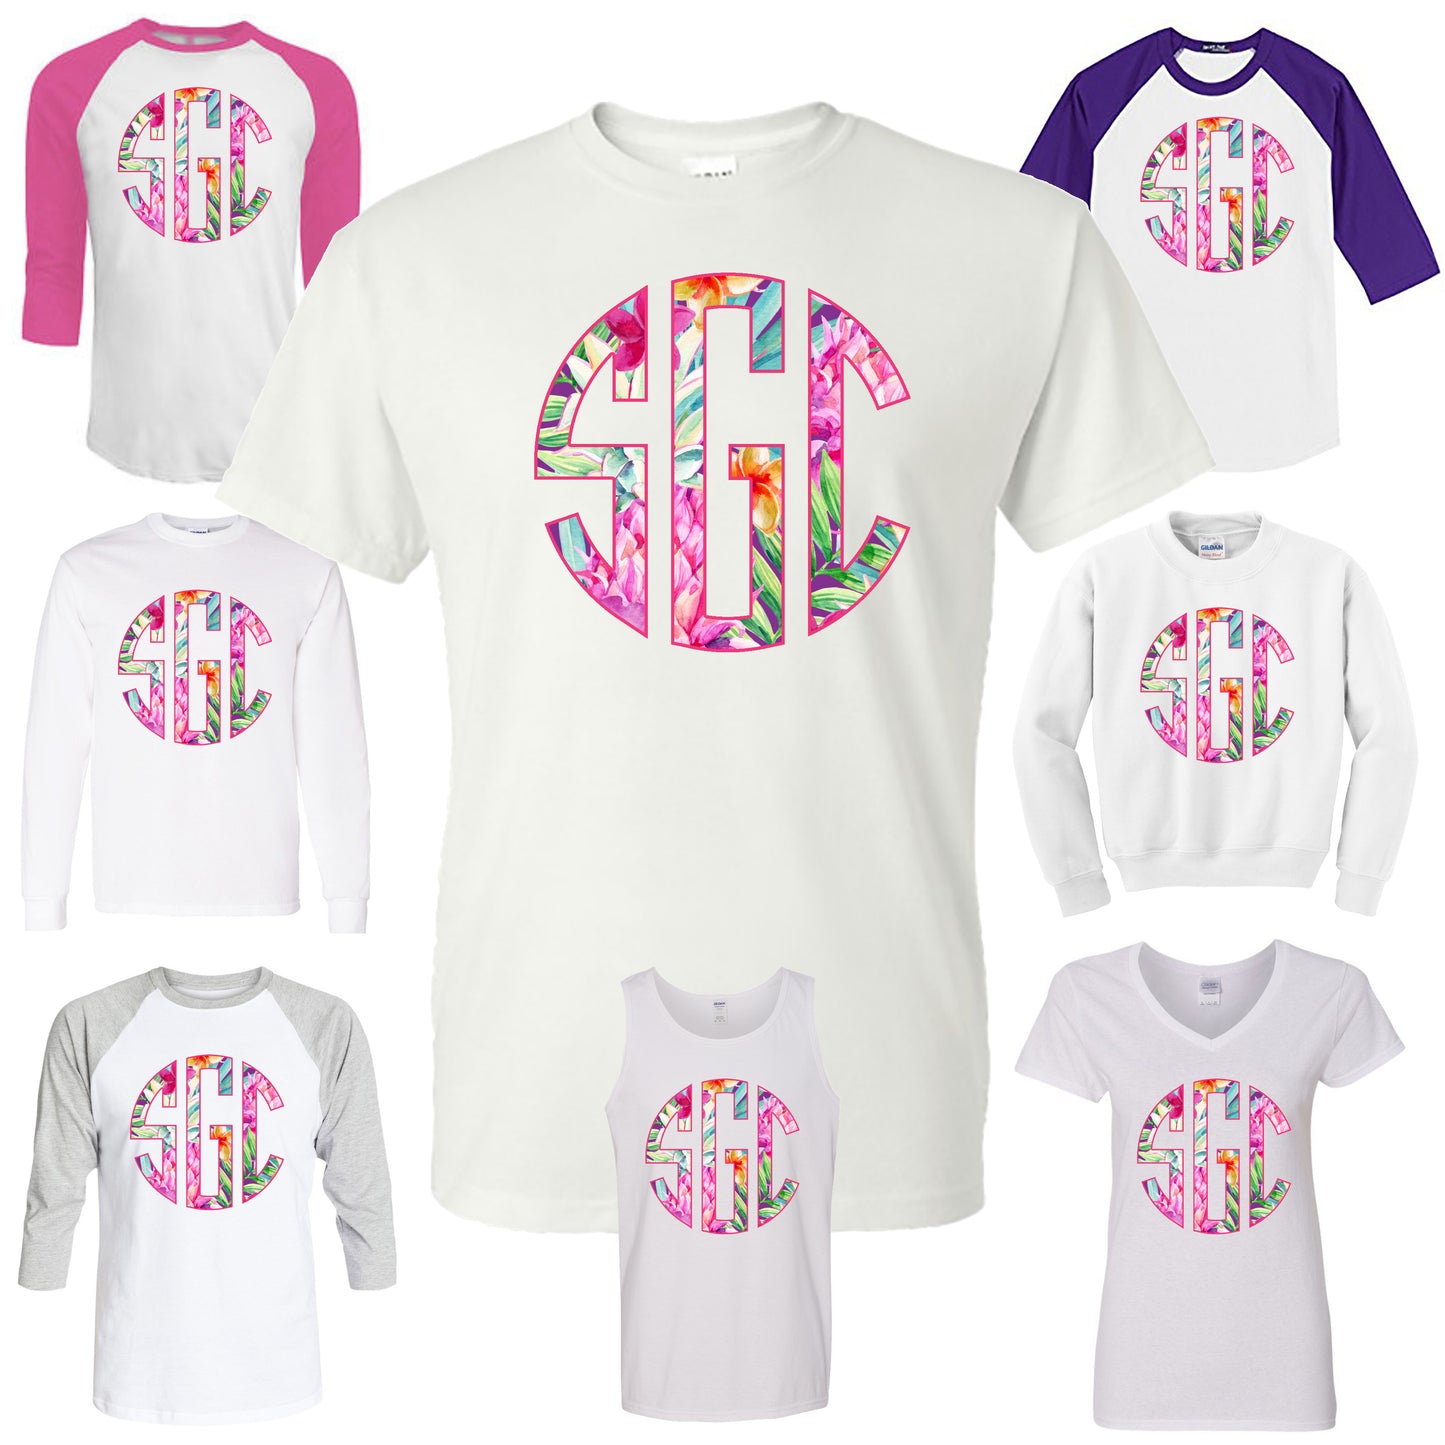 PINEAPPLE FLORAL CIRCLE MONOGRAM PRINTED SHIRT - Southern Grace Creations